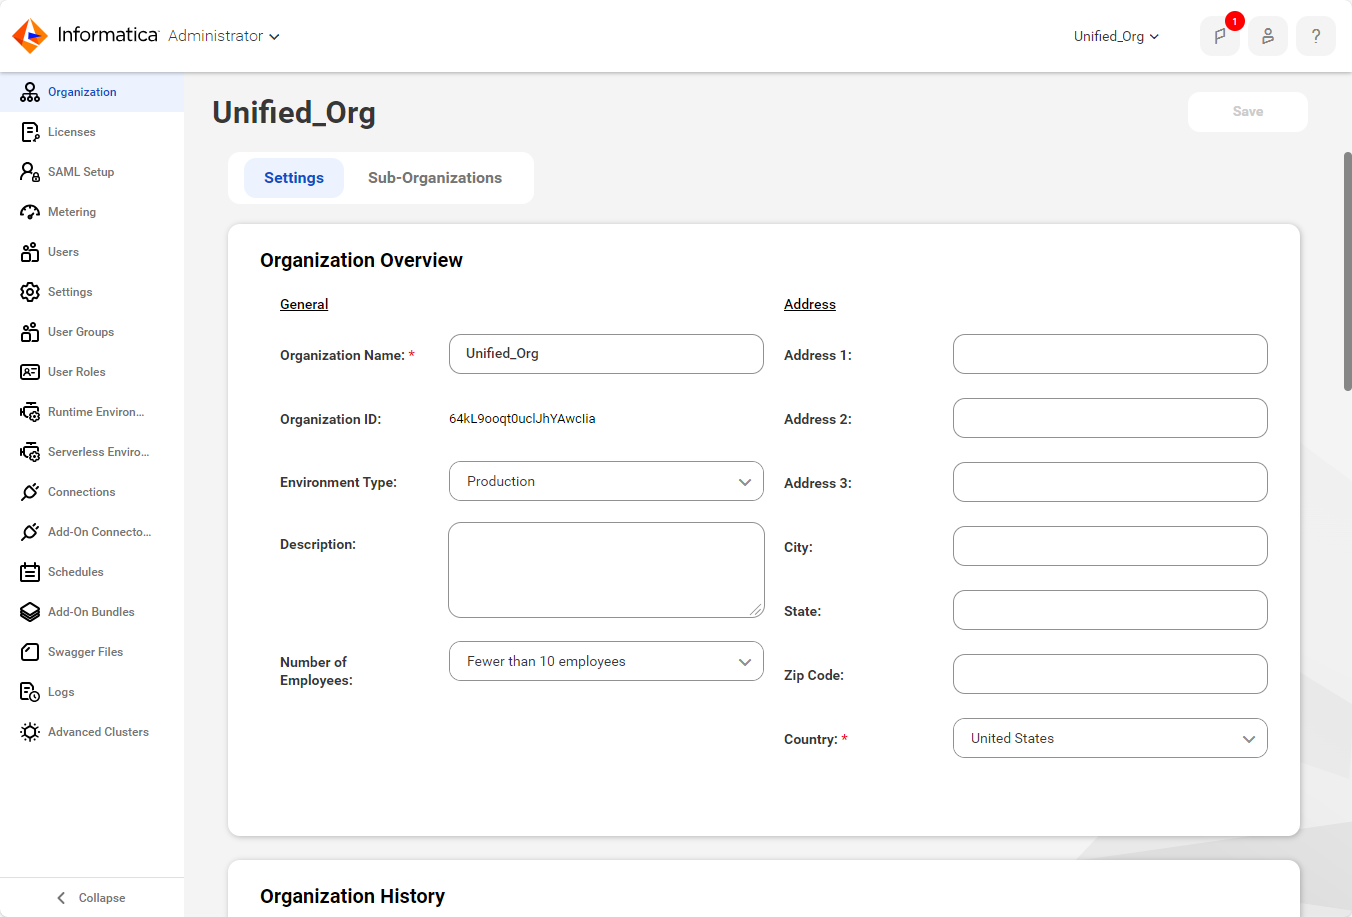 The Organization page displays details about the organization that include the name and address properties, authentication properties, and Data Integration service properties.